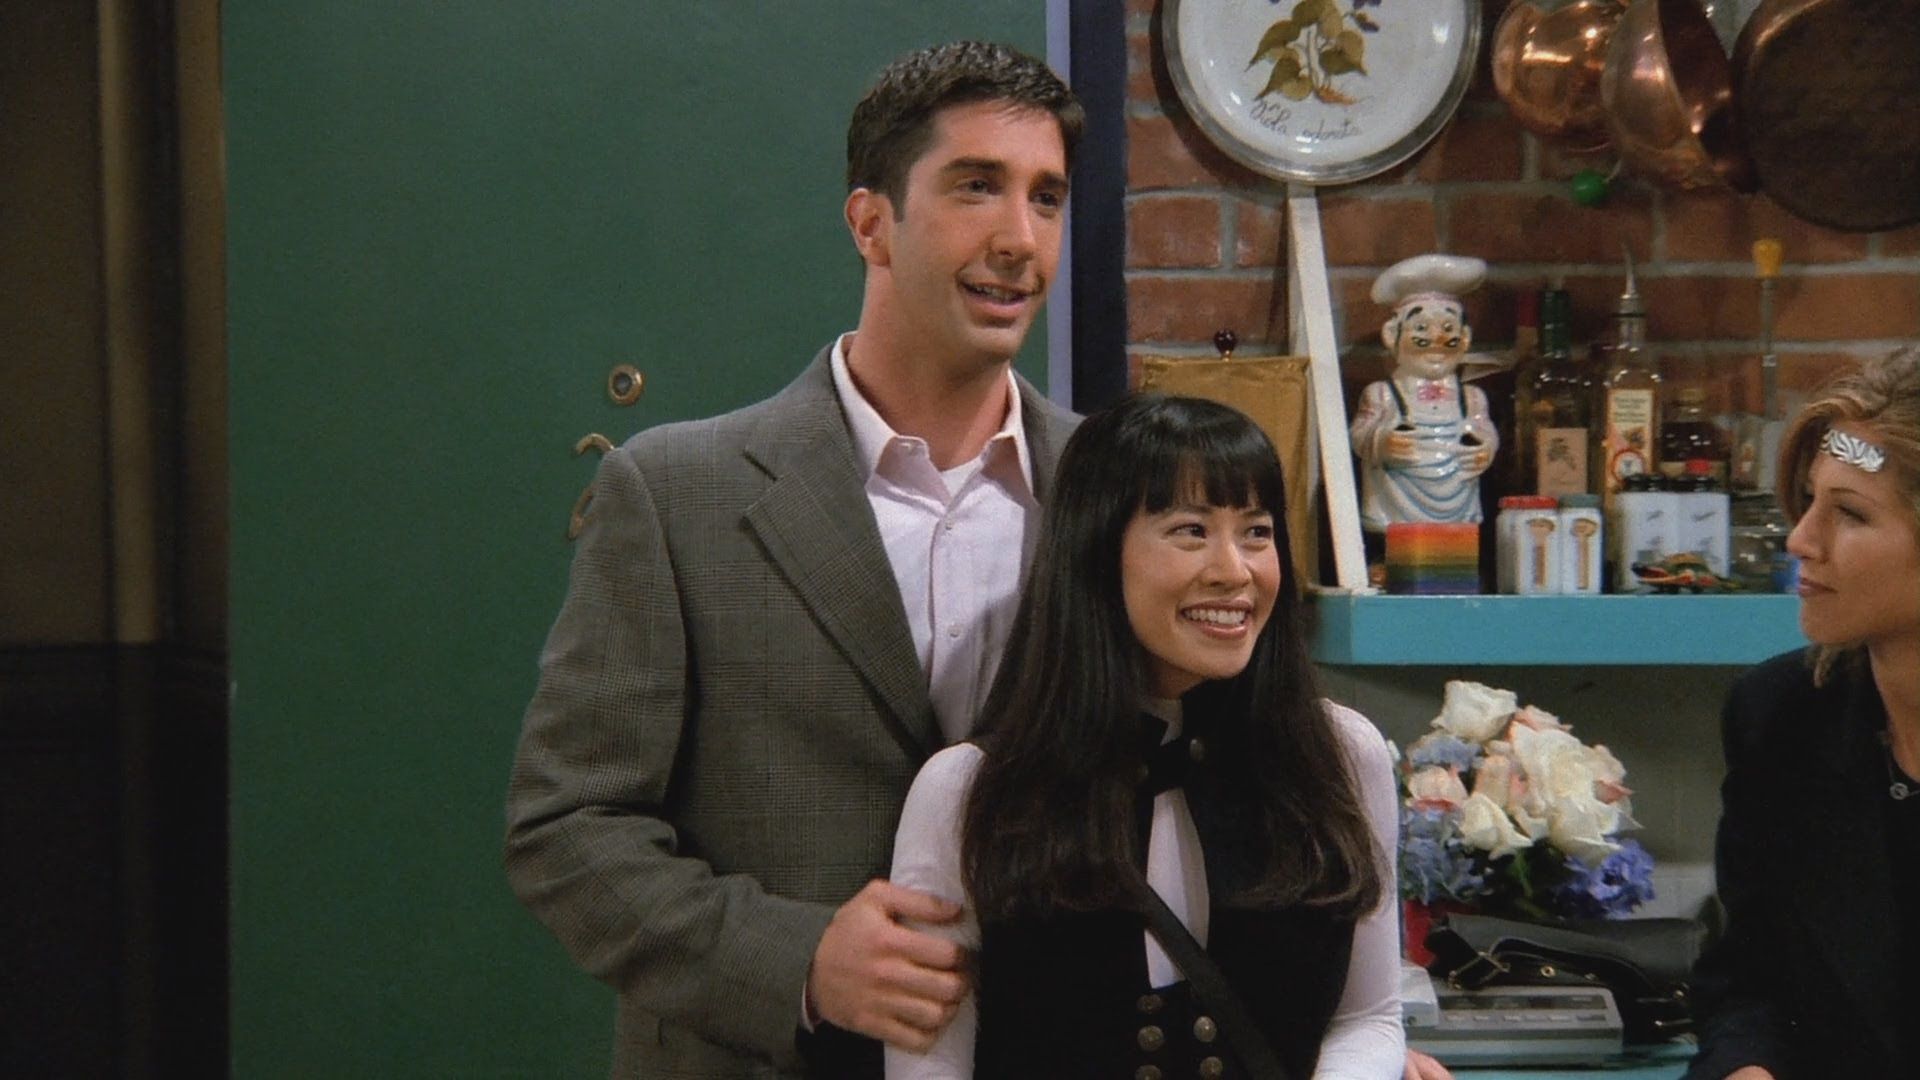 Friends Co-Creator Regrets Not Doing Enough To Promote Diversity On The Show